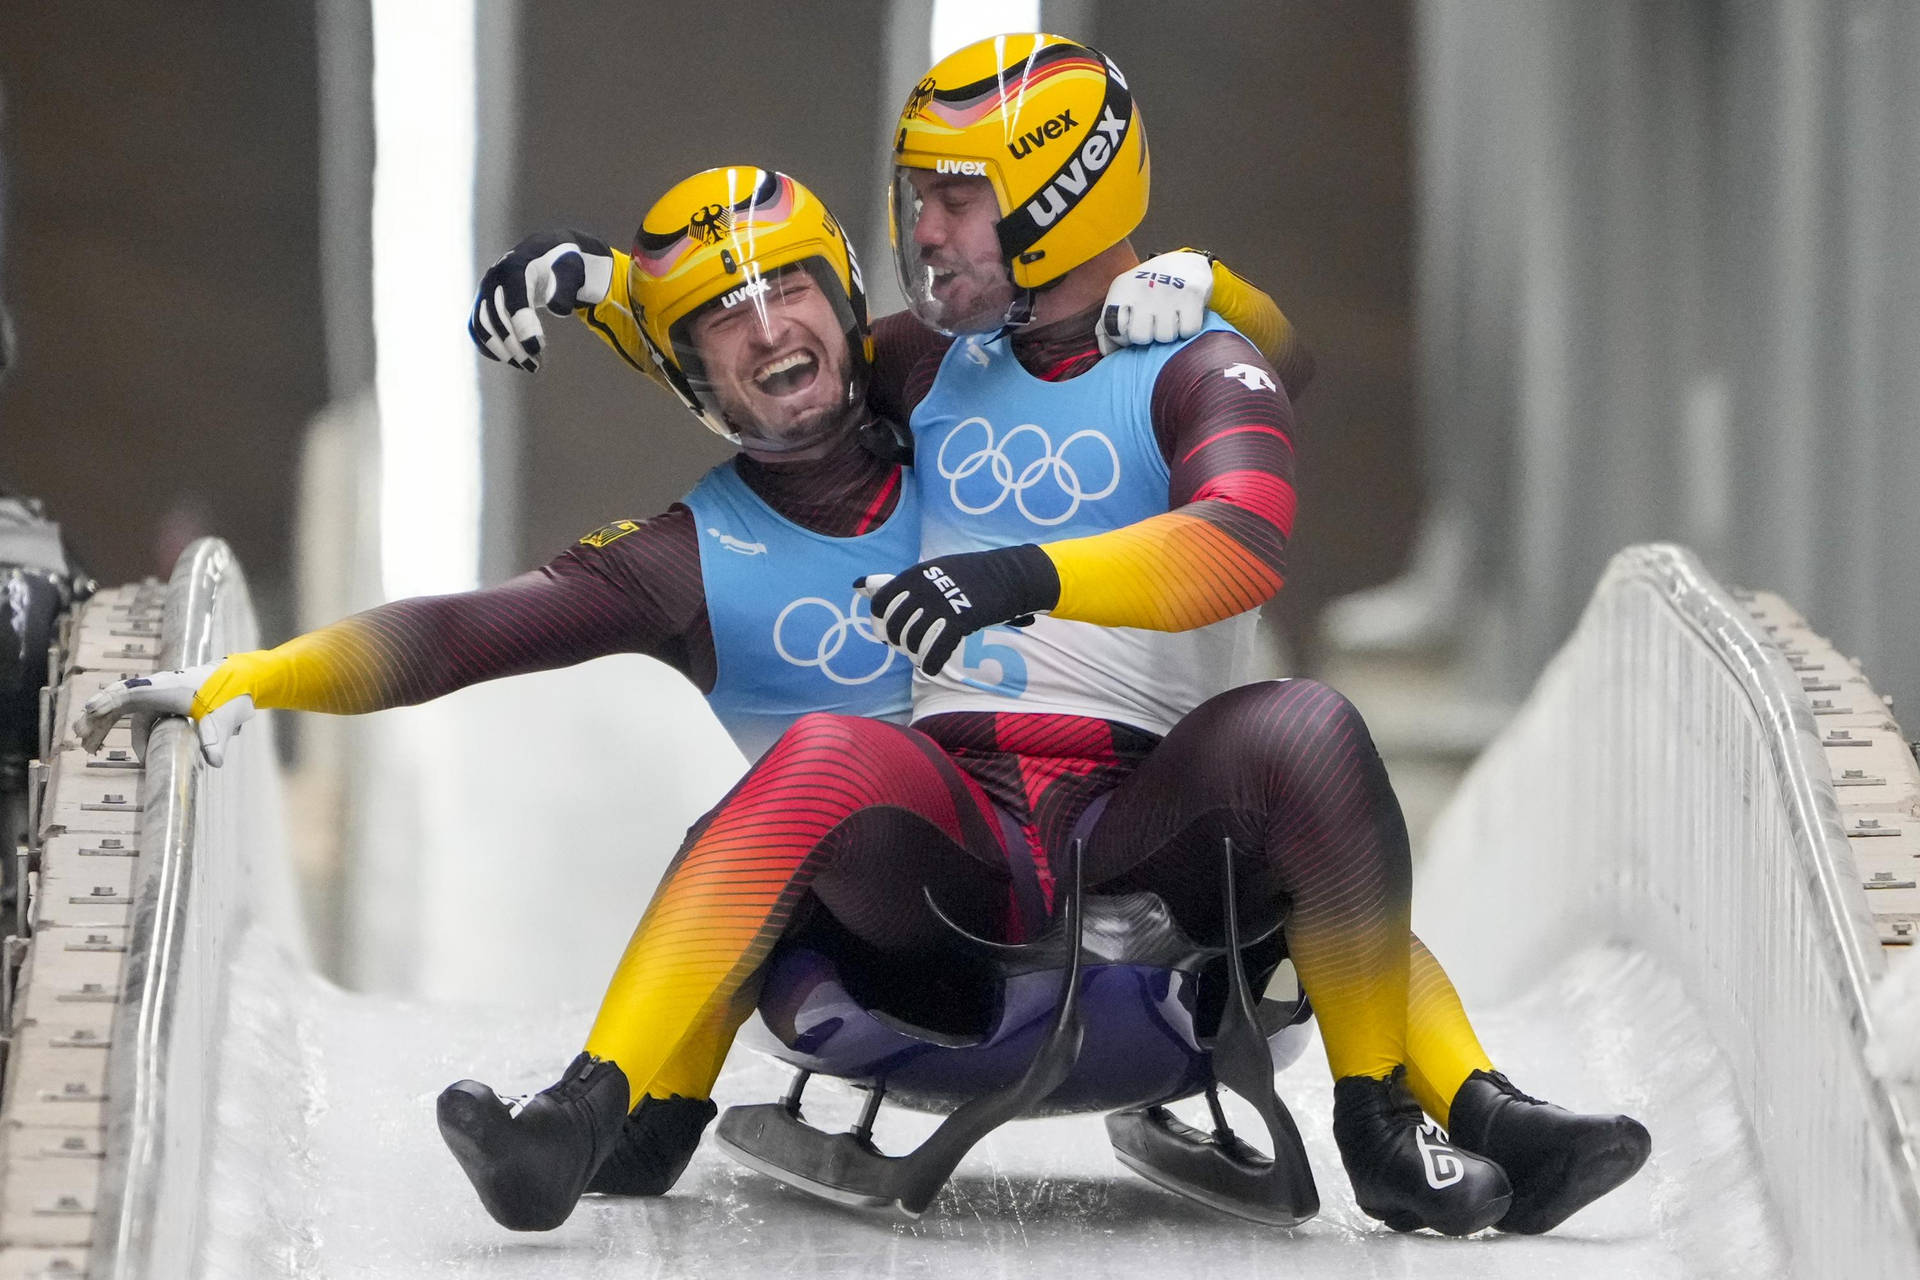 Team Germany Luge At The Winter Olympics Wallpaper